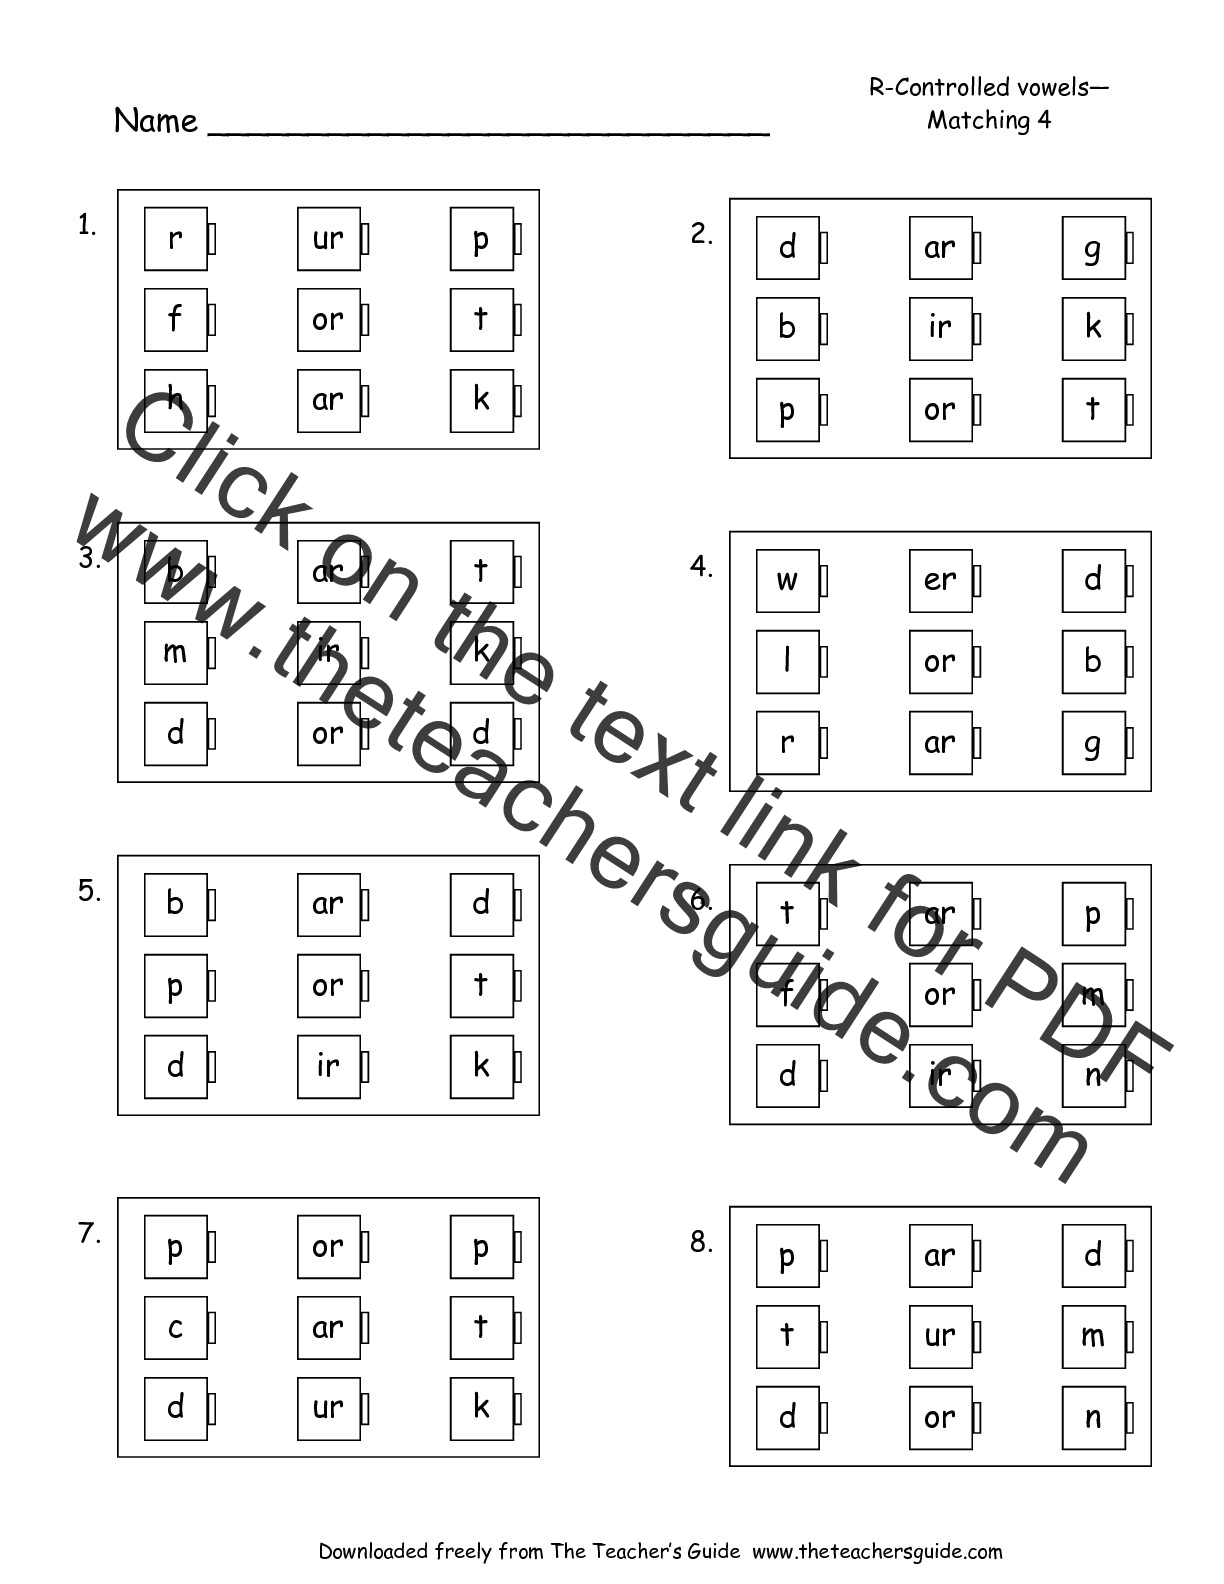 free-phonics-printouts-from-the-teacher-s-guide